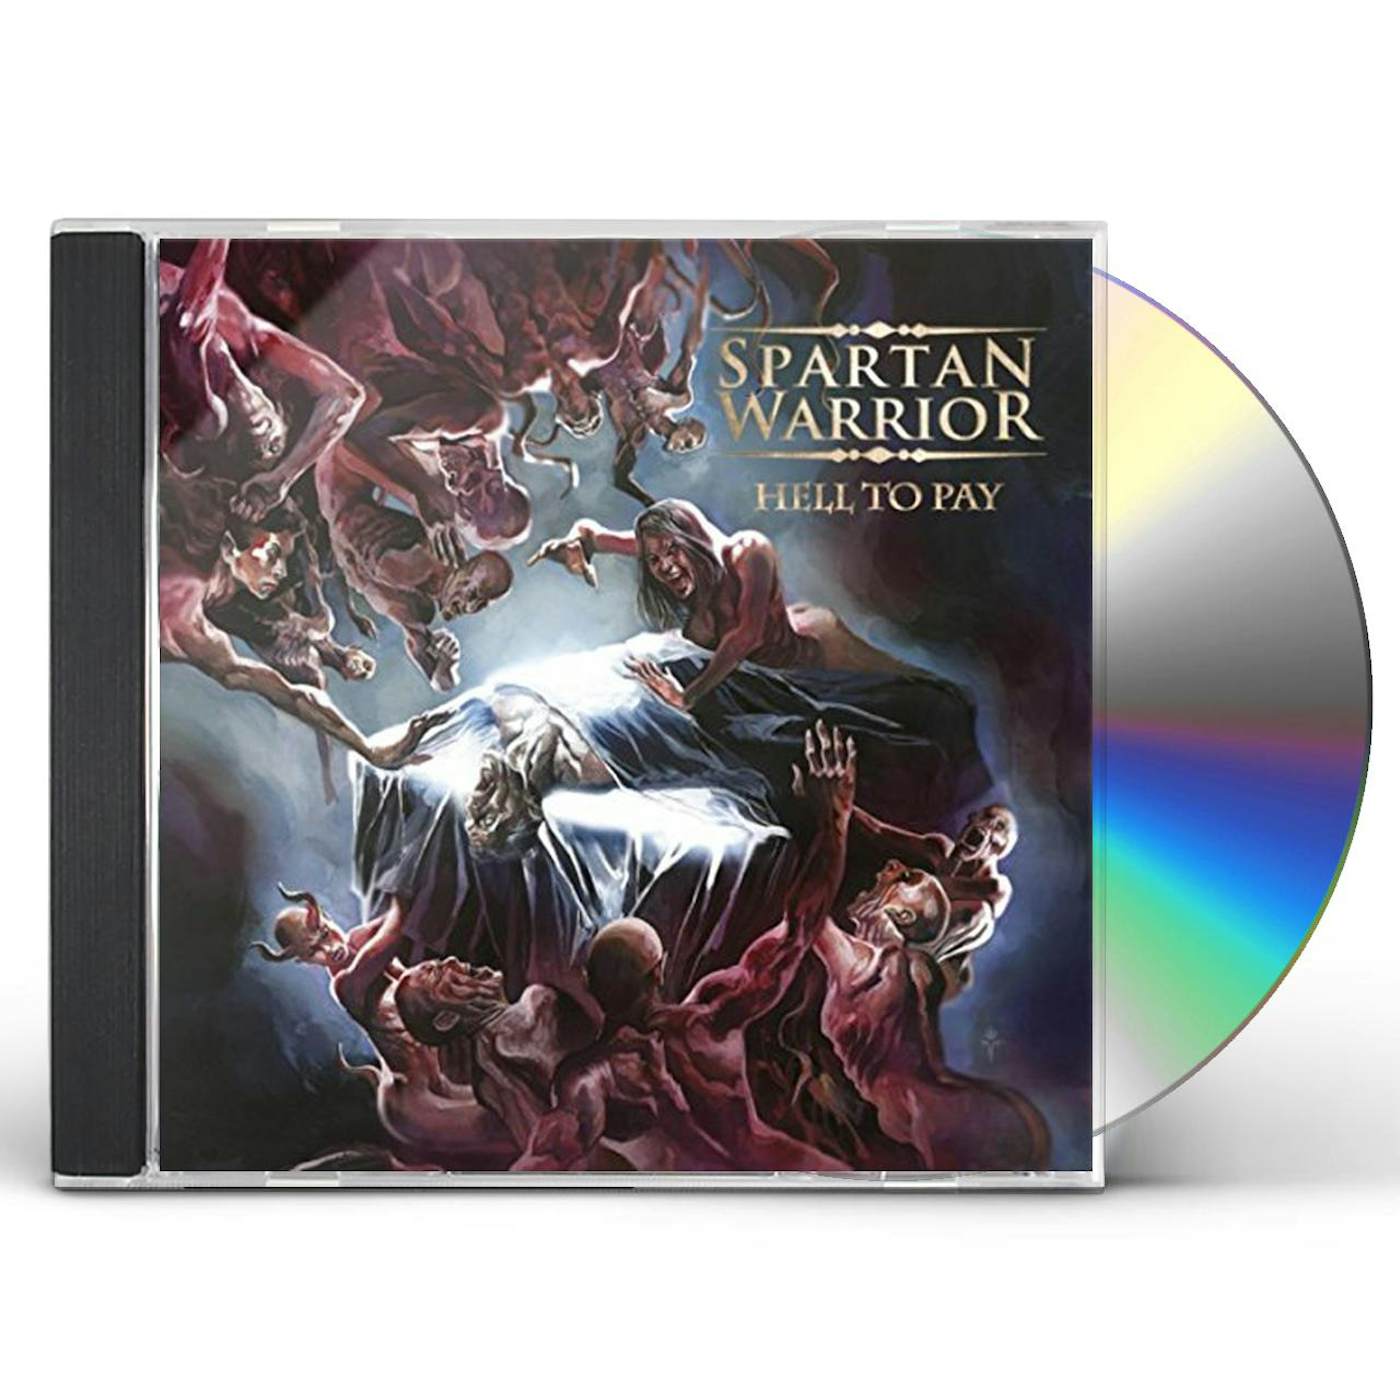 Spartan Warrior HELL TO PAY CD